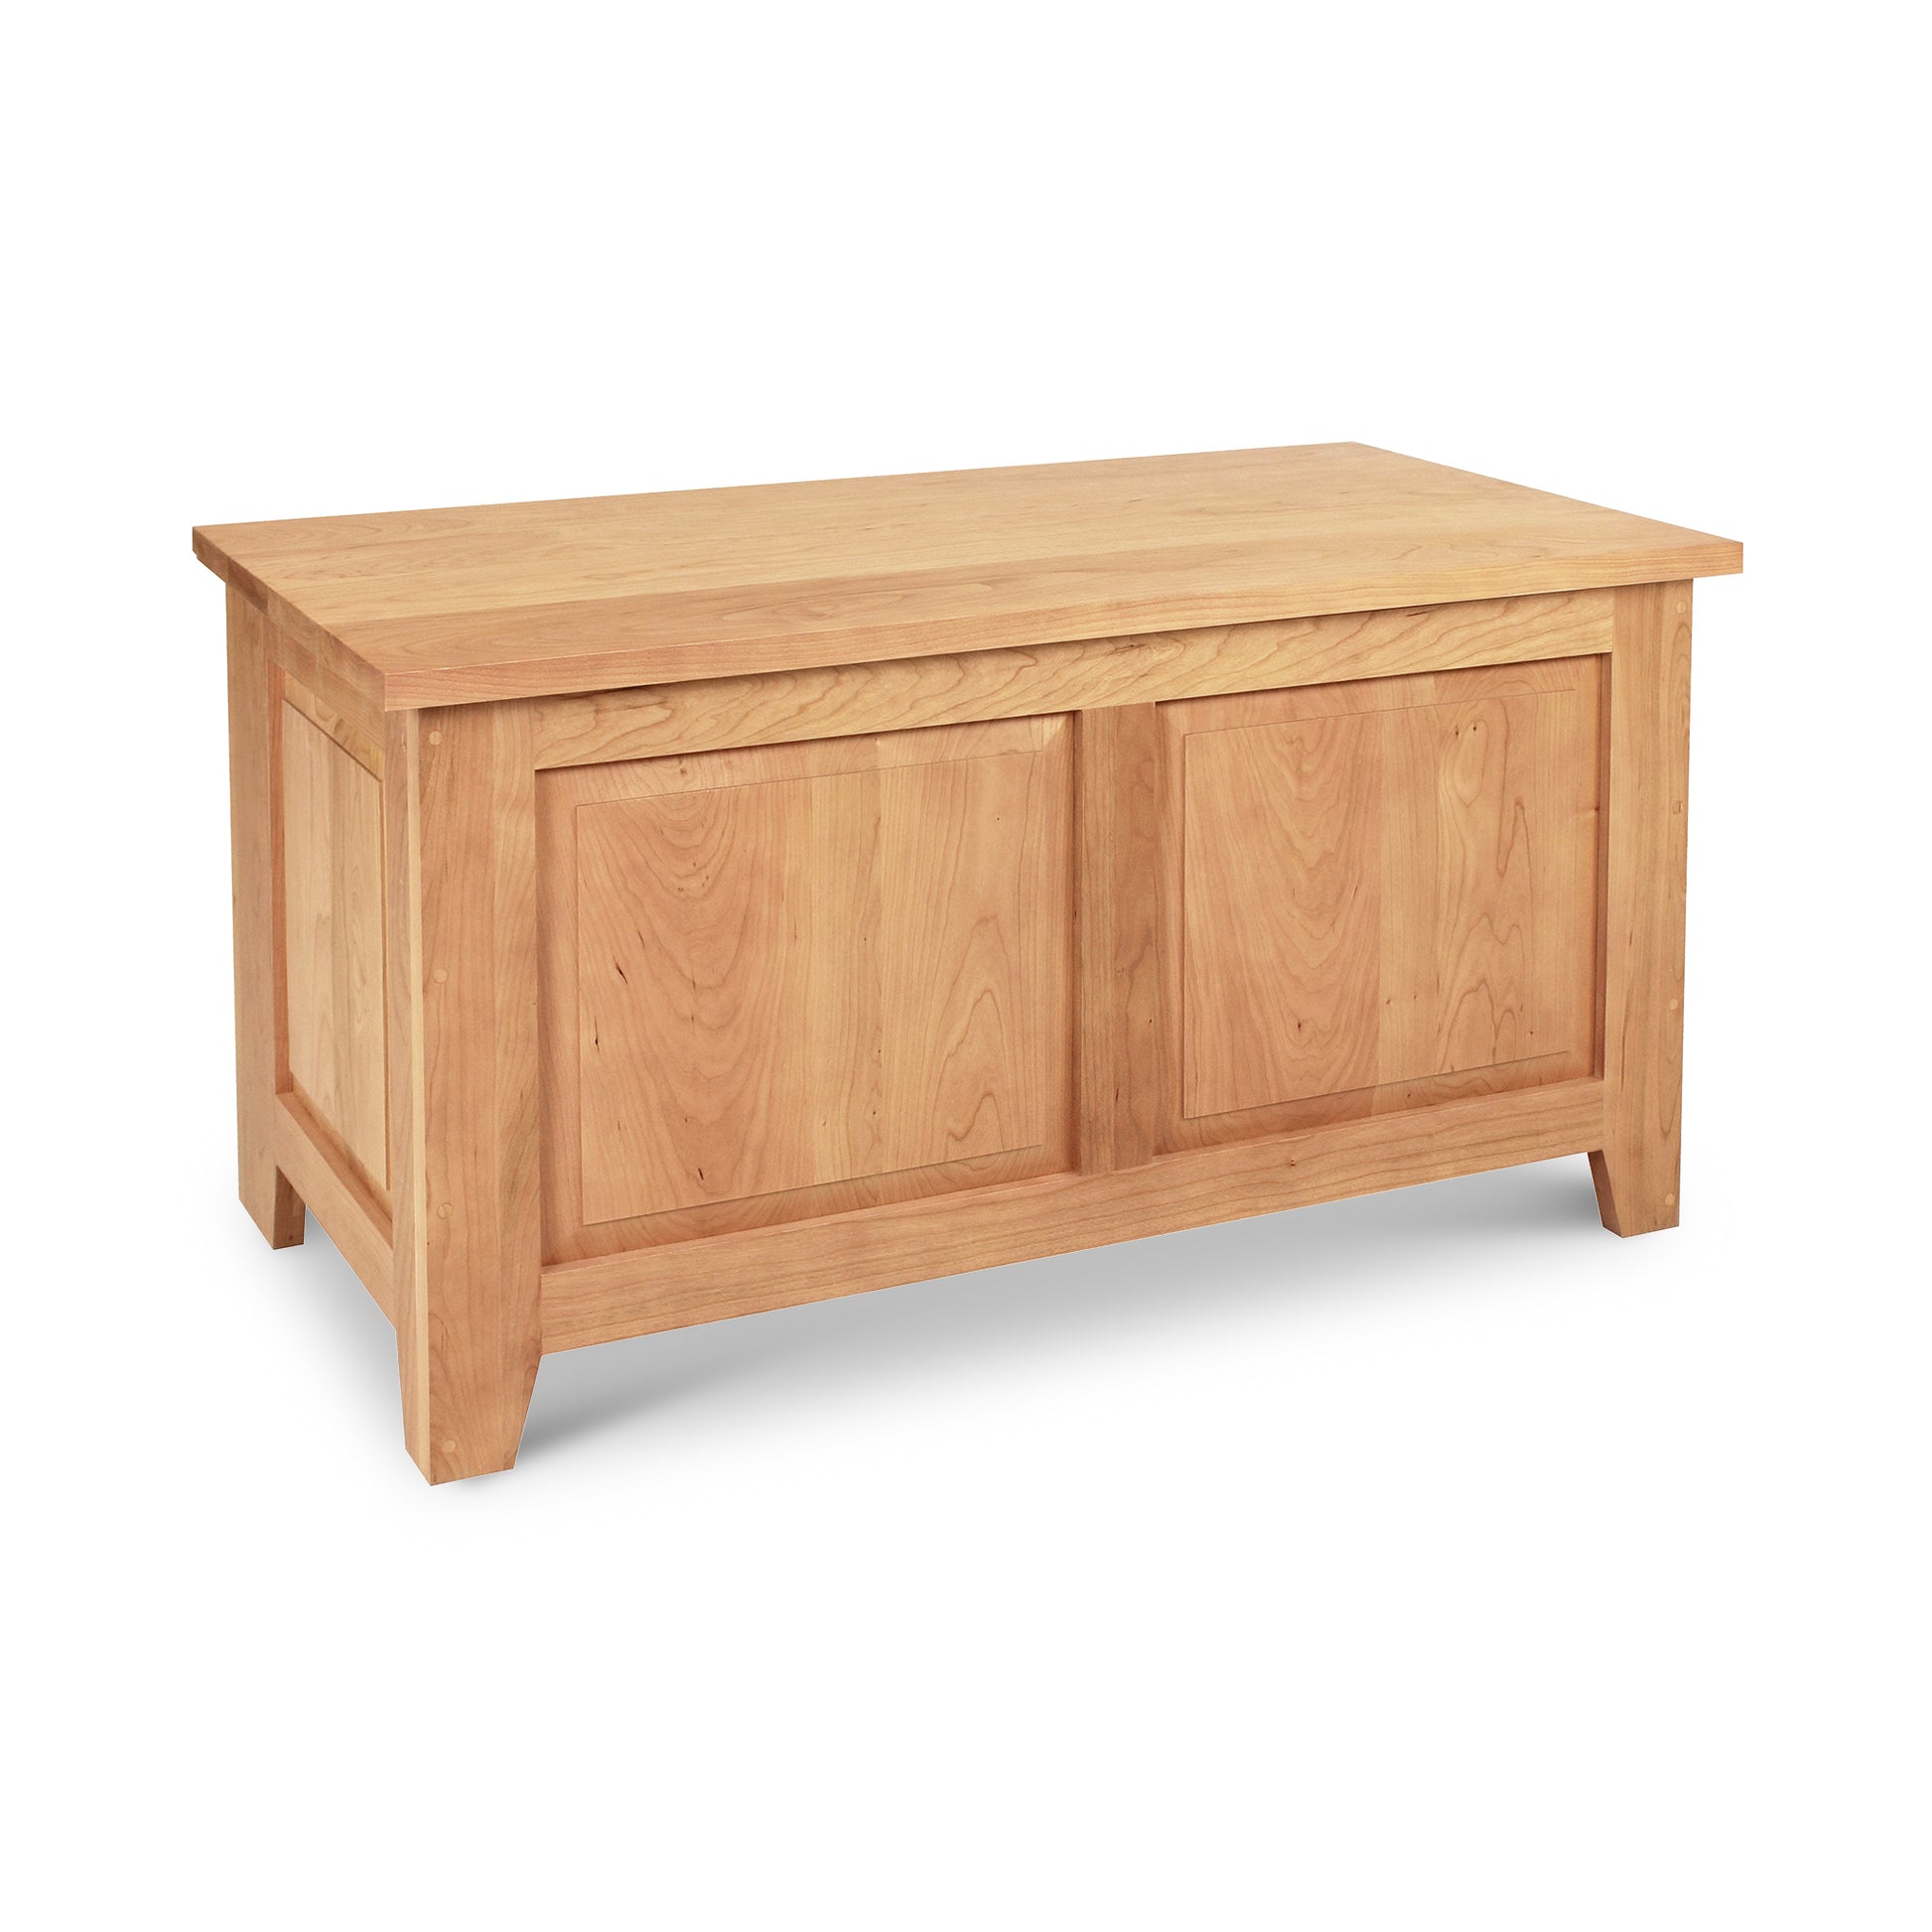 An American country wooden storage chest, the Lyndon Furniture American Country Blanket Box, on a white background.